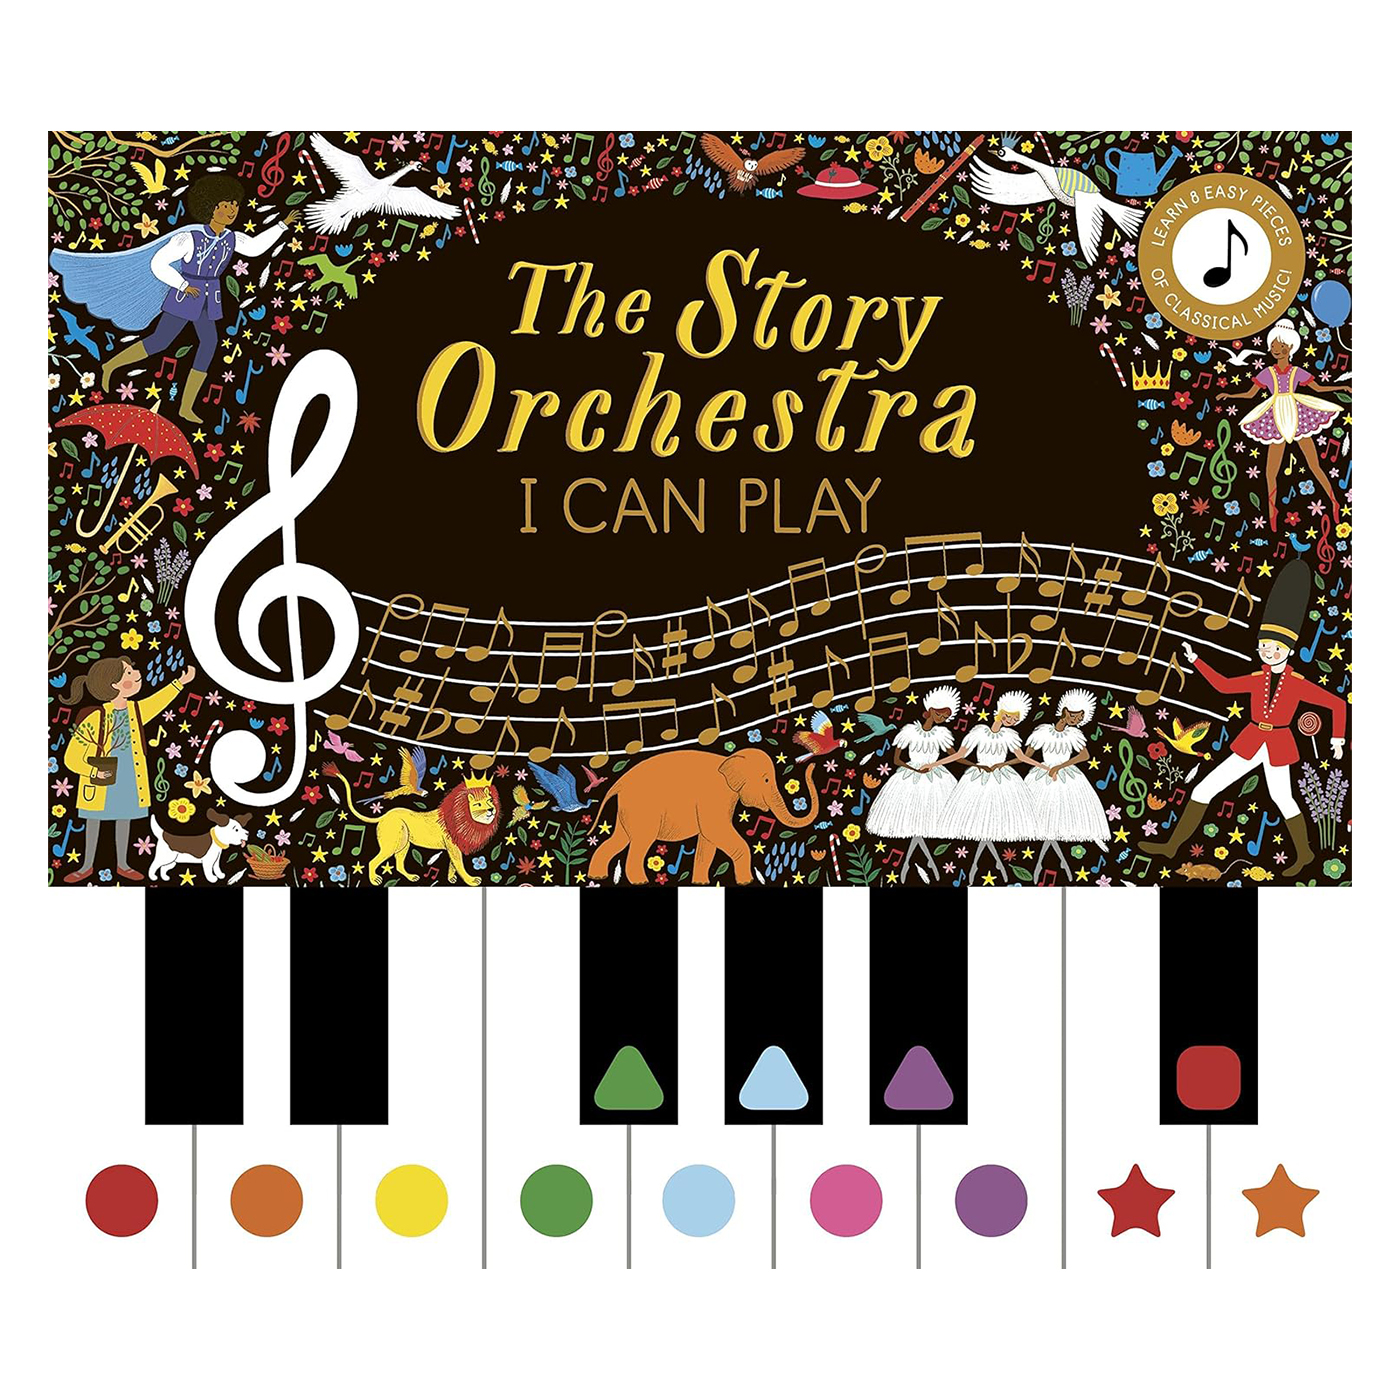  The Story Orchestra I Can Play